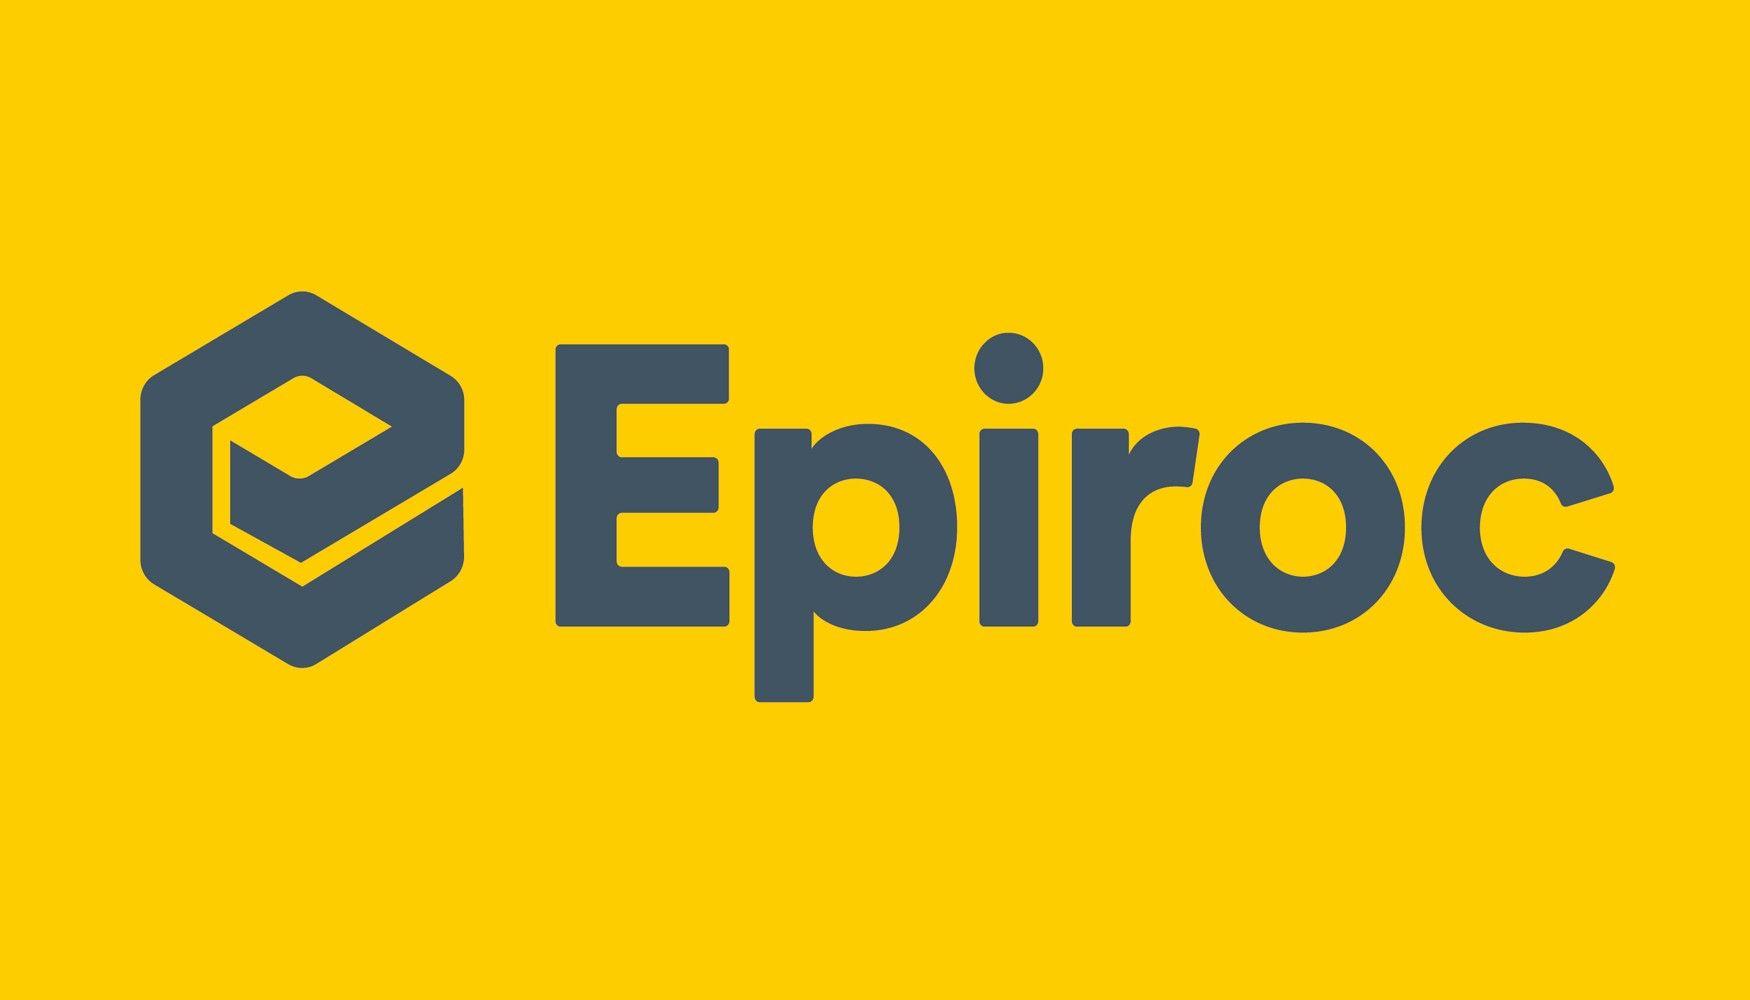 Epiroc Logo - Epiroc Products, Cutters, Compactors and more